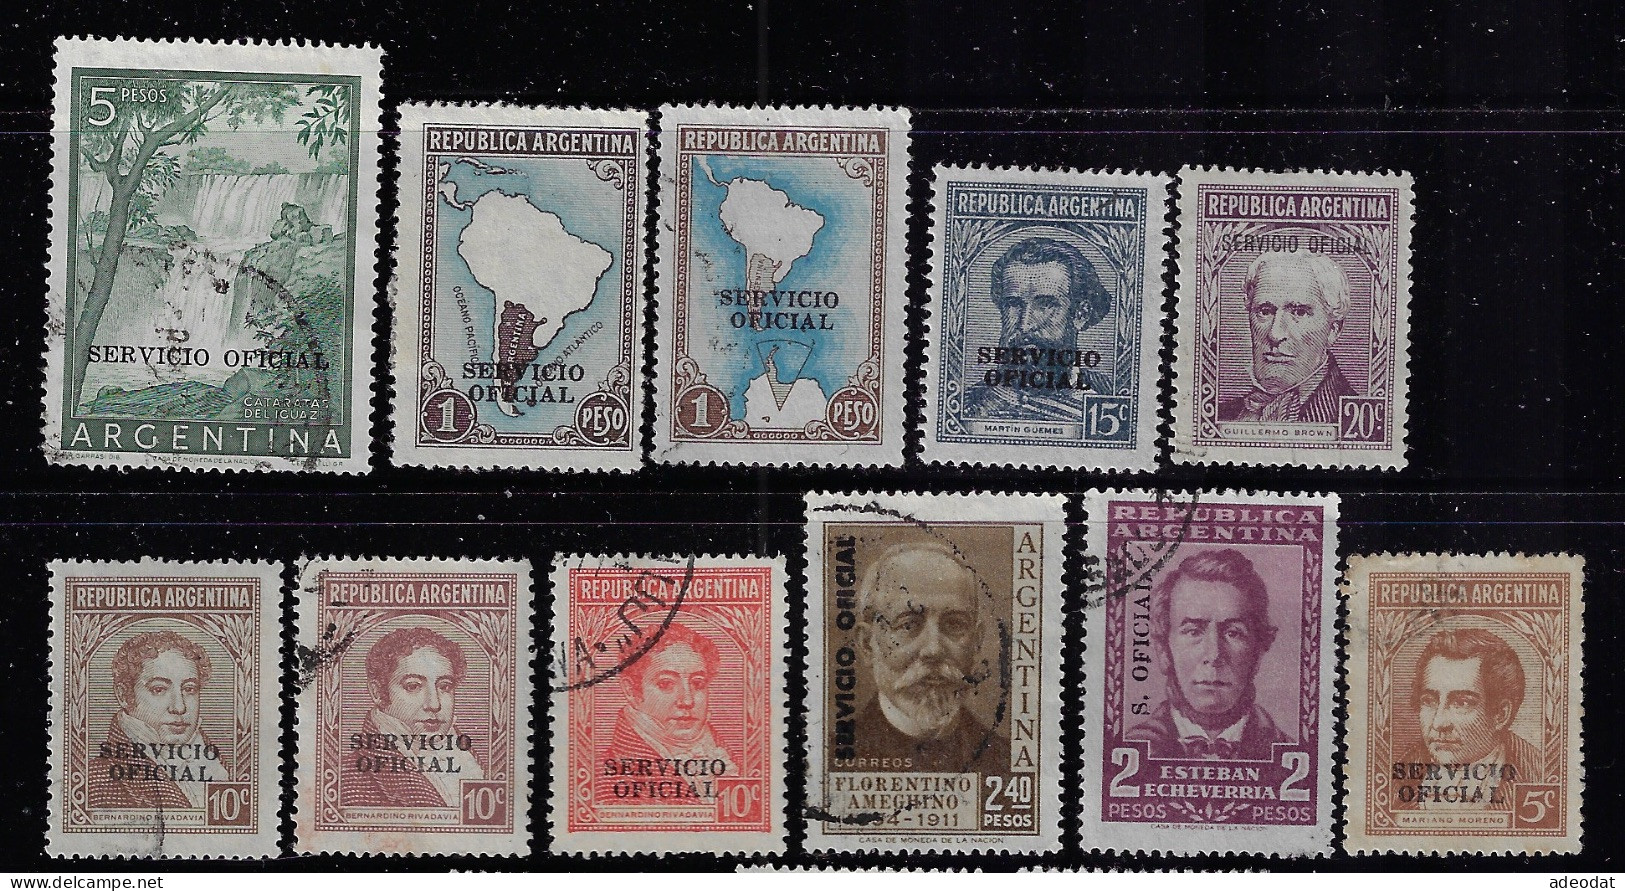 ARGENTINA 1938-1960  OFFICIAL   STAMPS  SCOTT # 35 STAMPS USED - Used Stamps